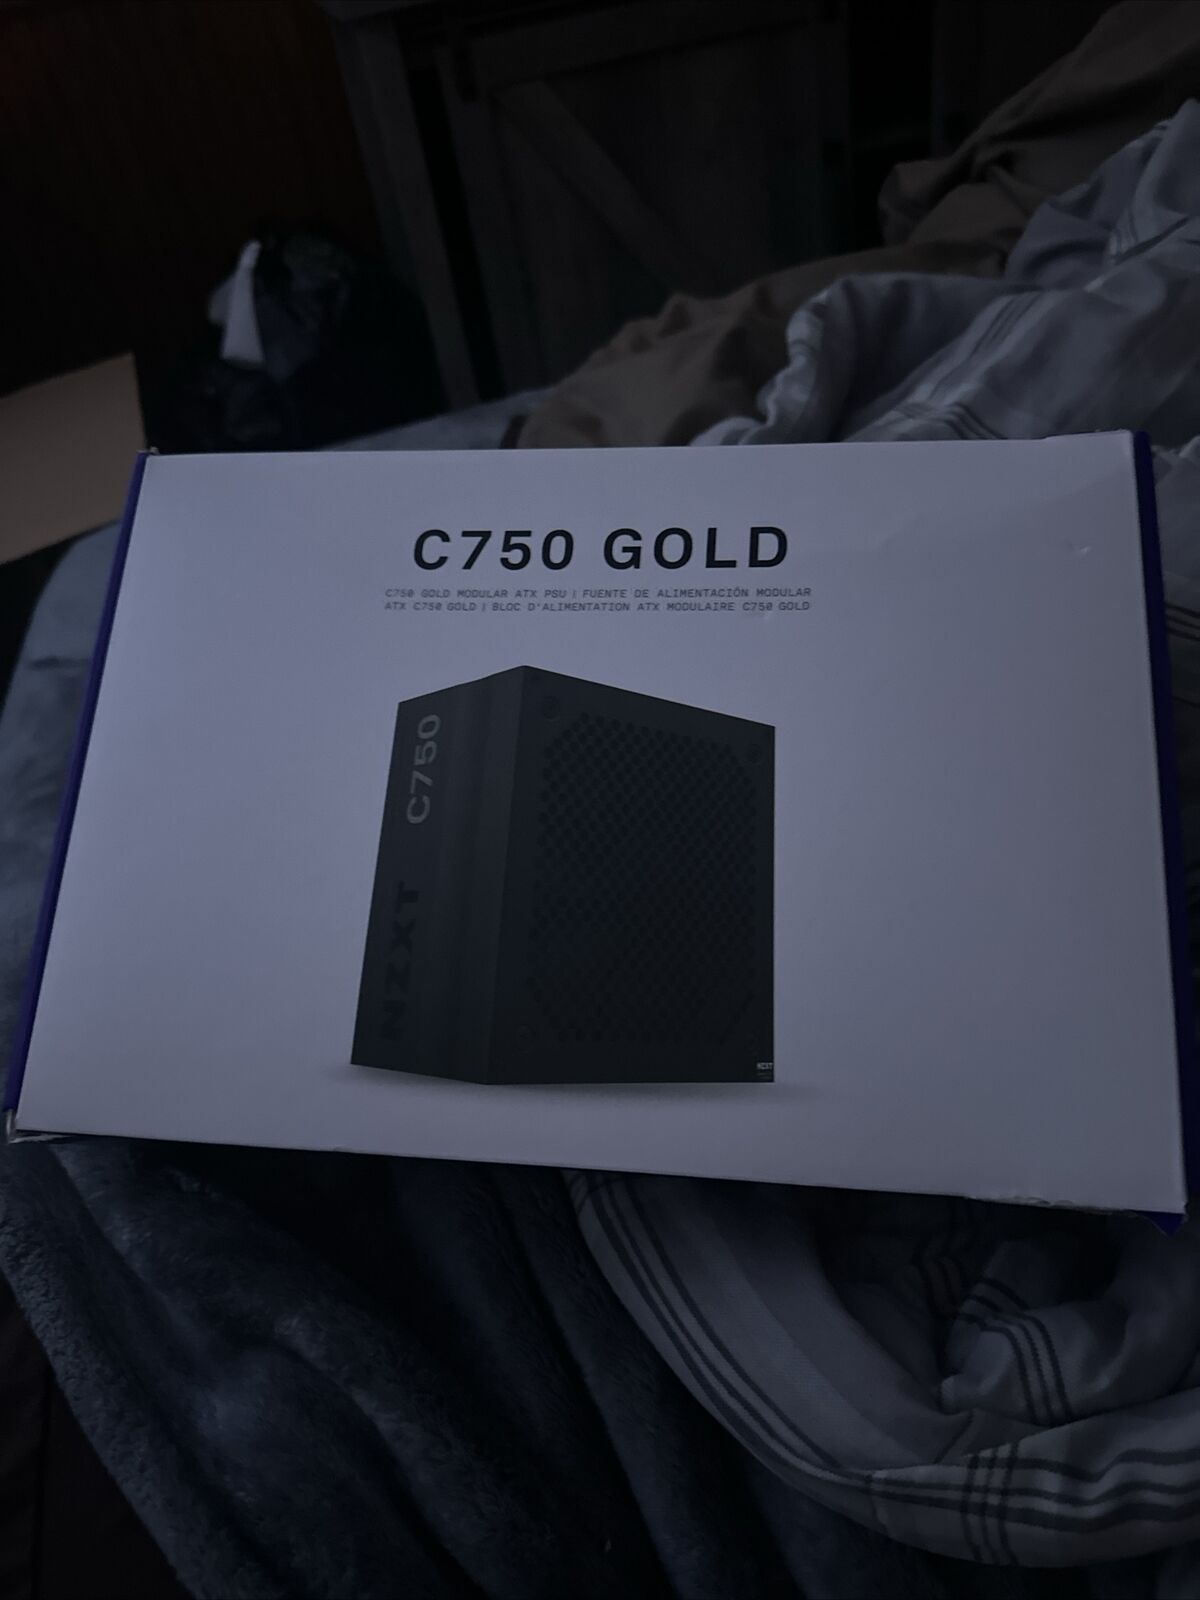 Power Bank For Pc C750 Gold Not Mini, Certified Nzxt